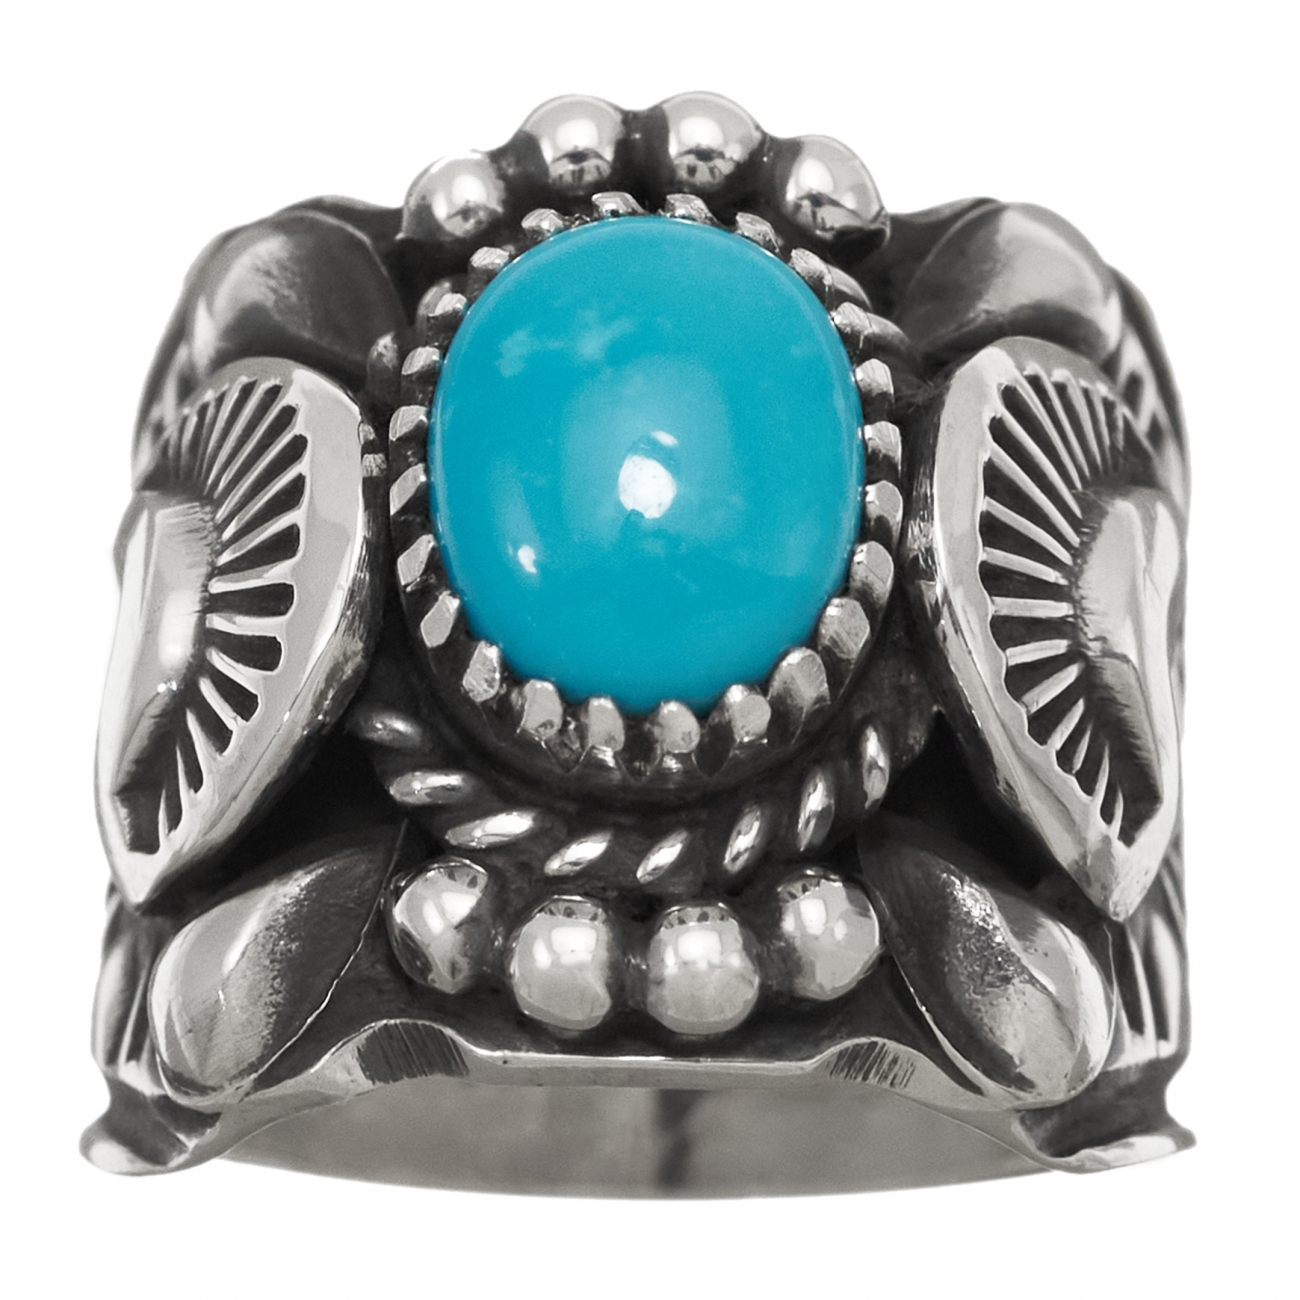 Harpo Paris unisex ring BA1071 in turquoise and silver